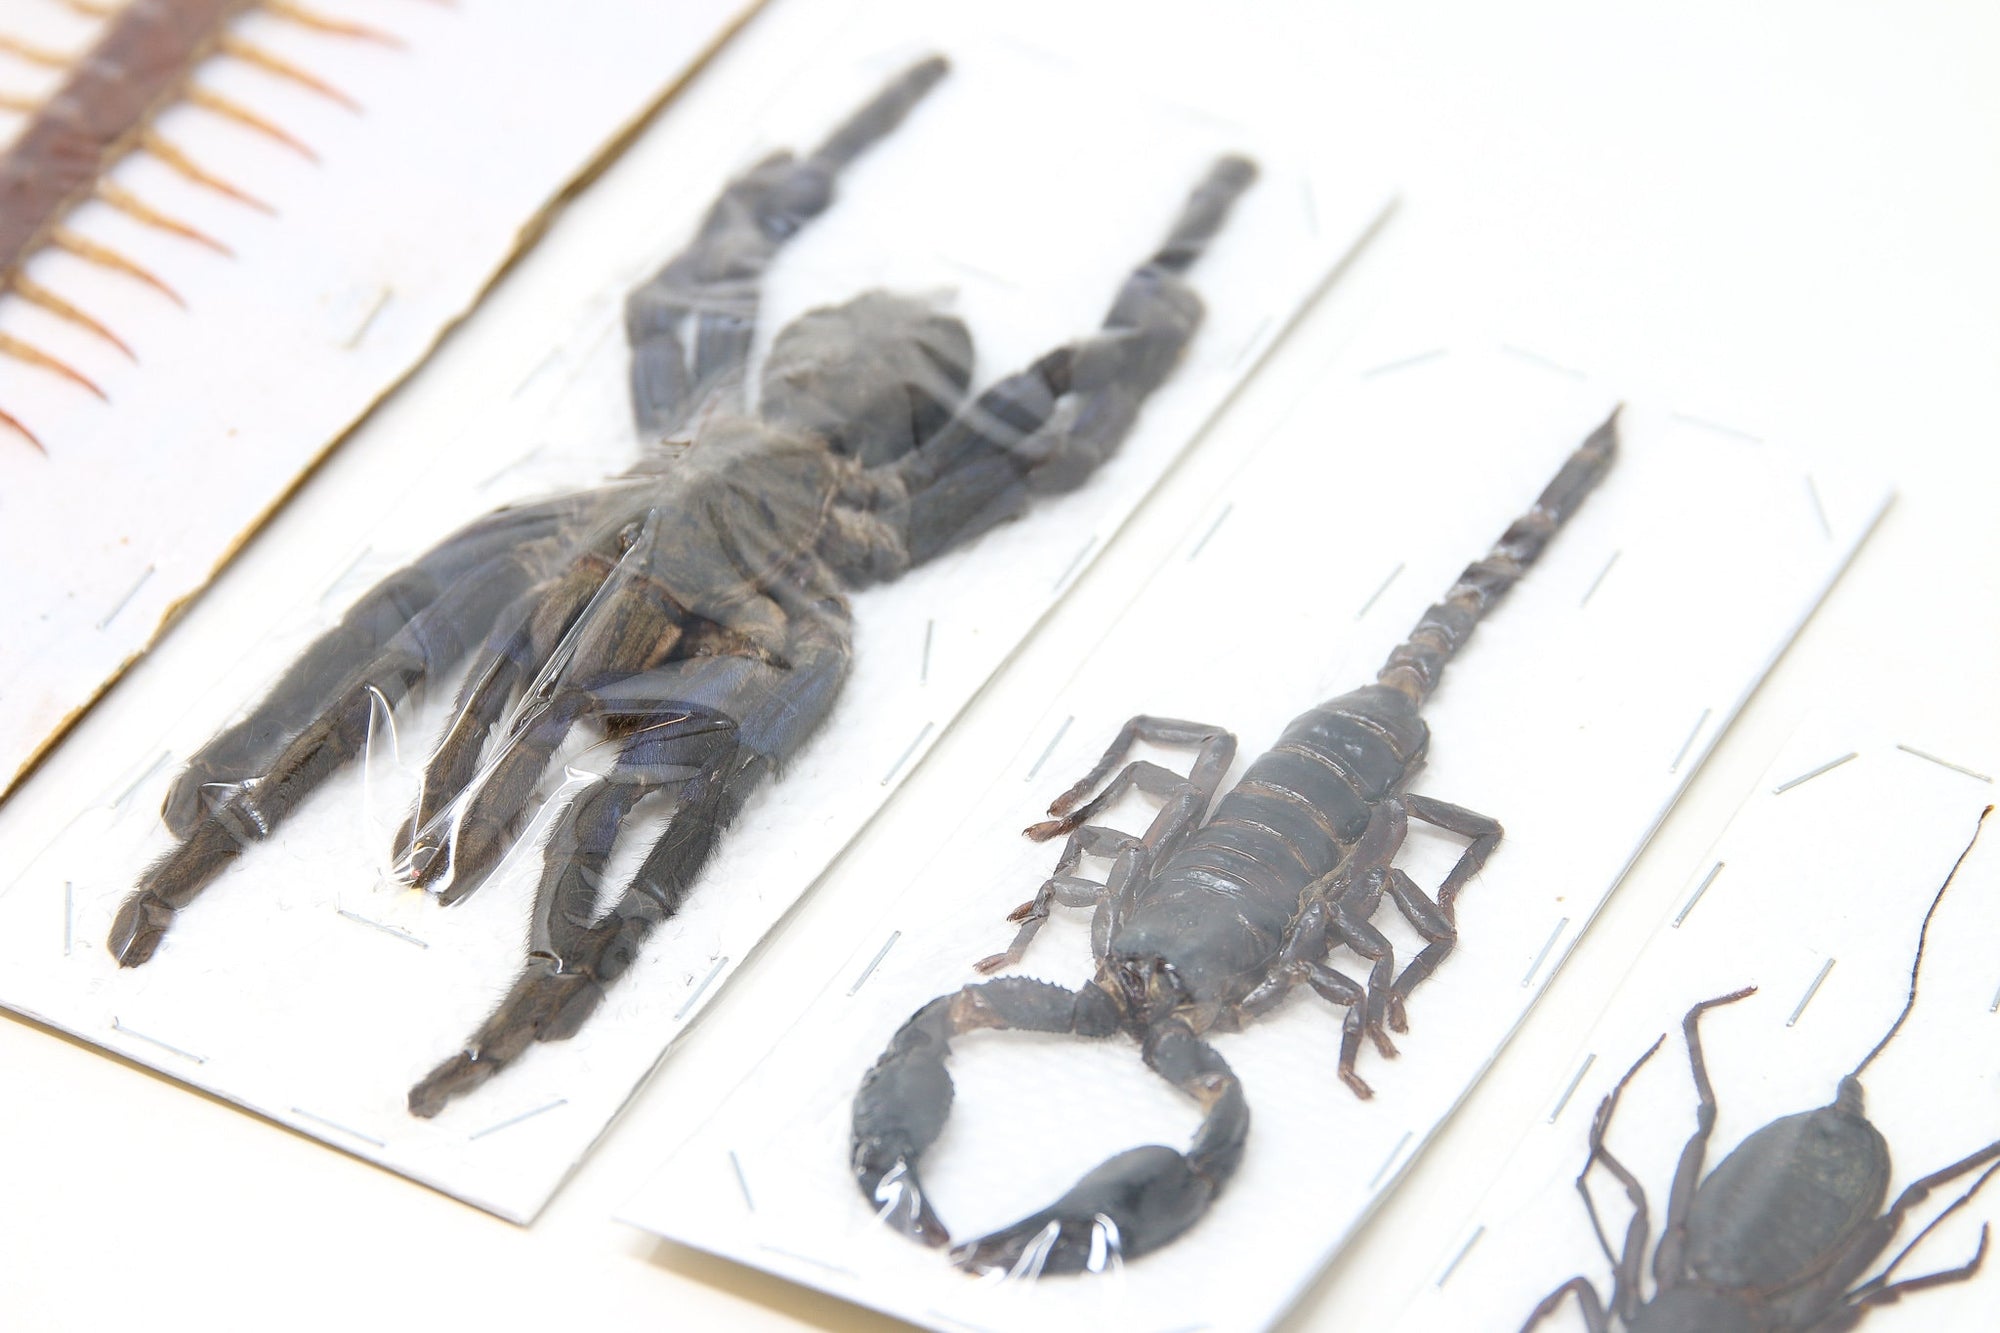 Arachnid Collection x Blue Bird-Eating Tarantula, Giant Forest Scorpion, Giant Centipede Scolopendra, Whip Scorpion | A1 Taxidermy Specimens